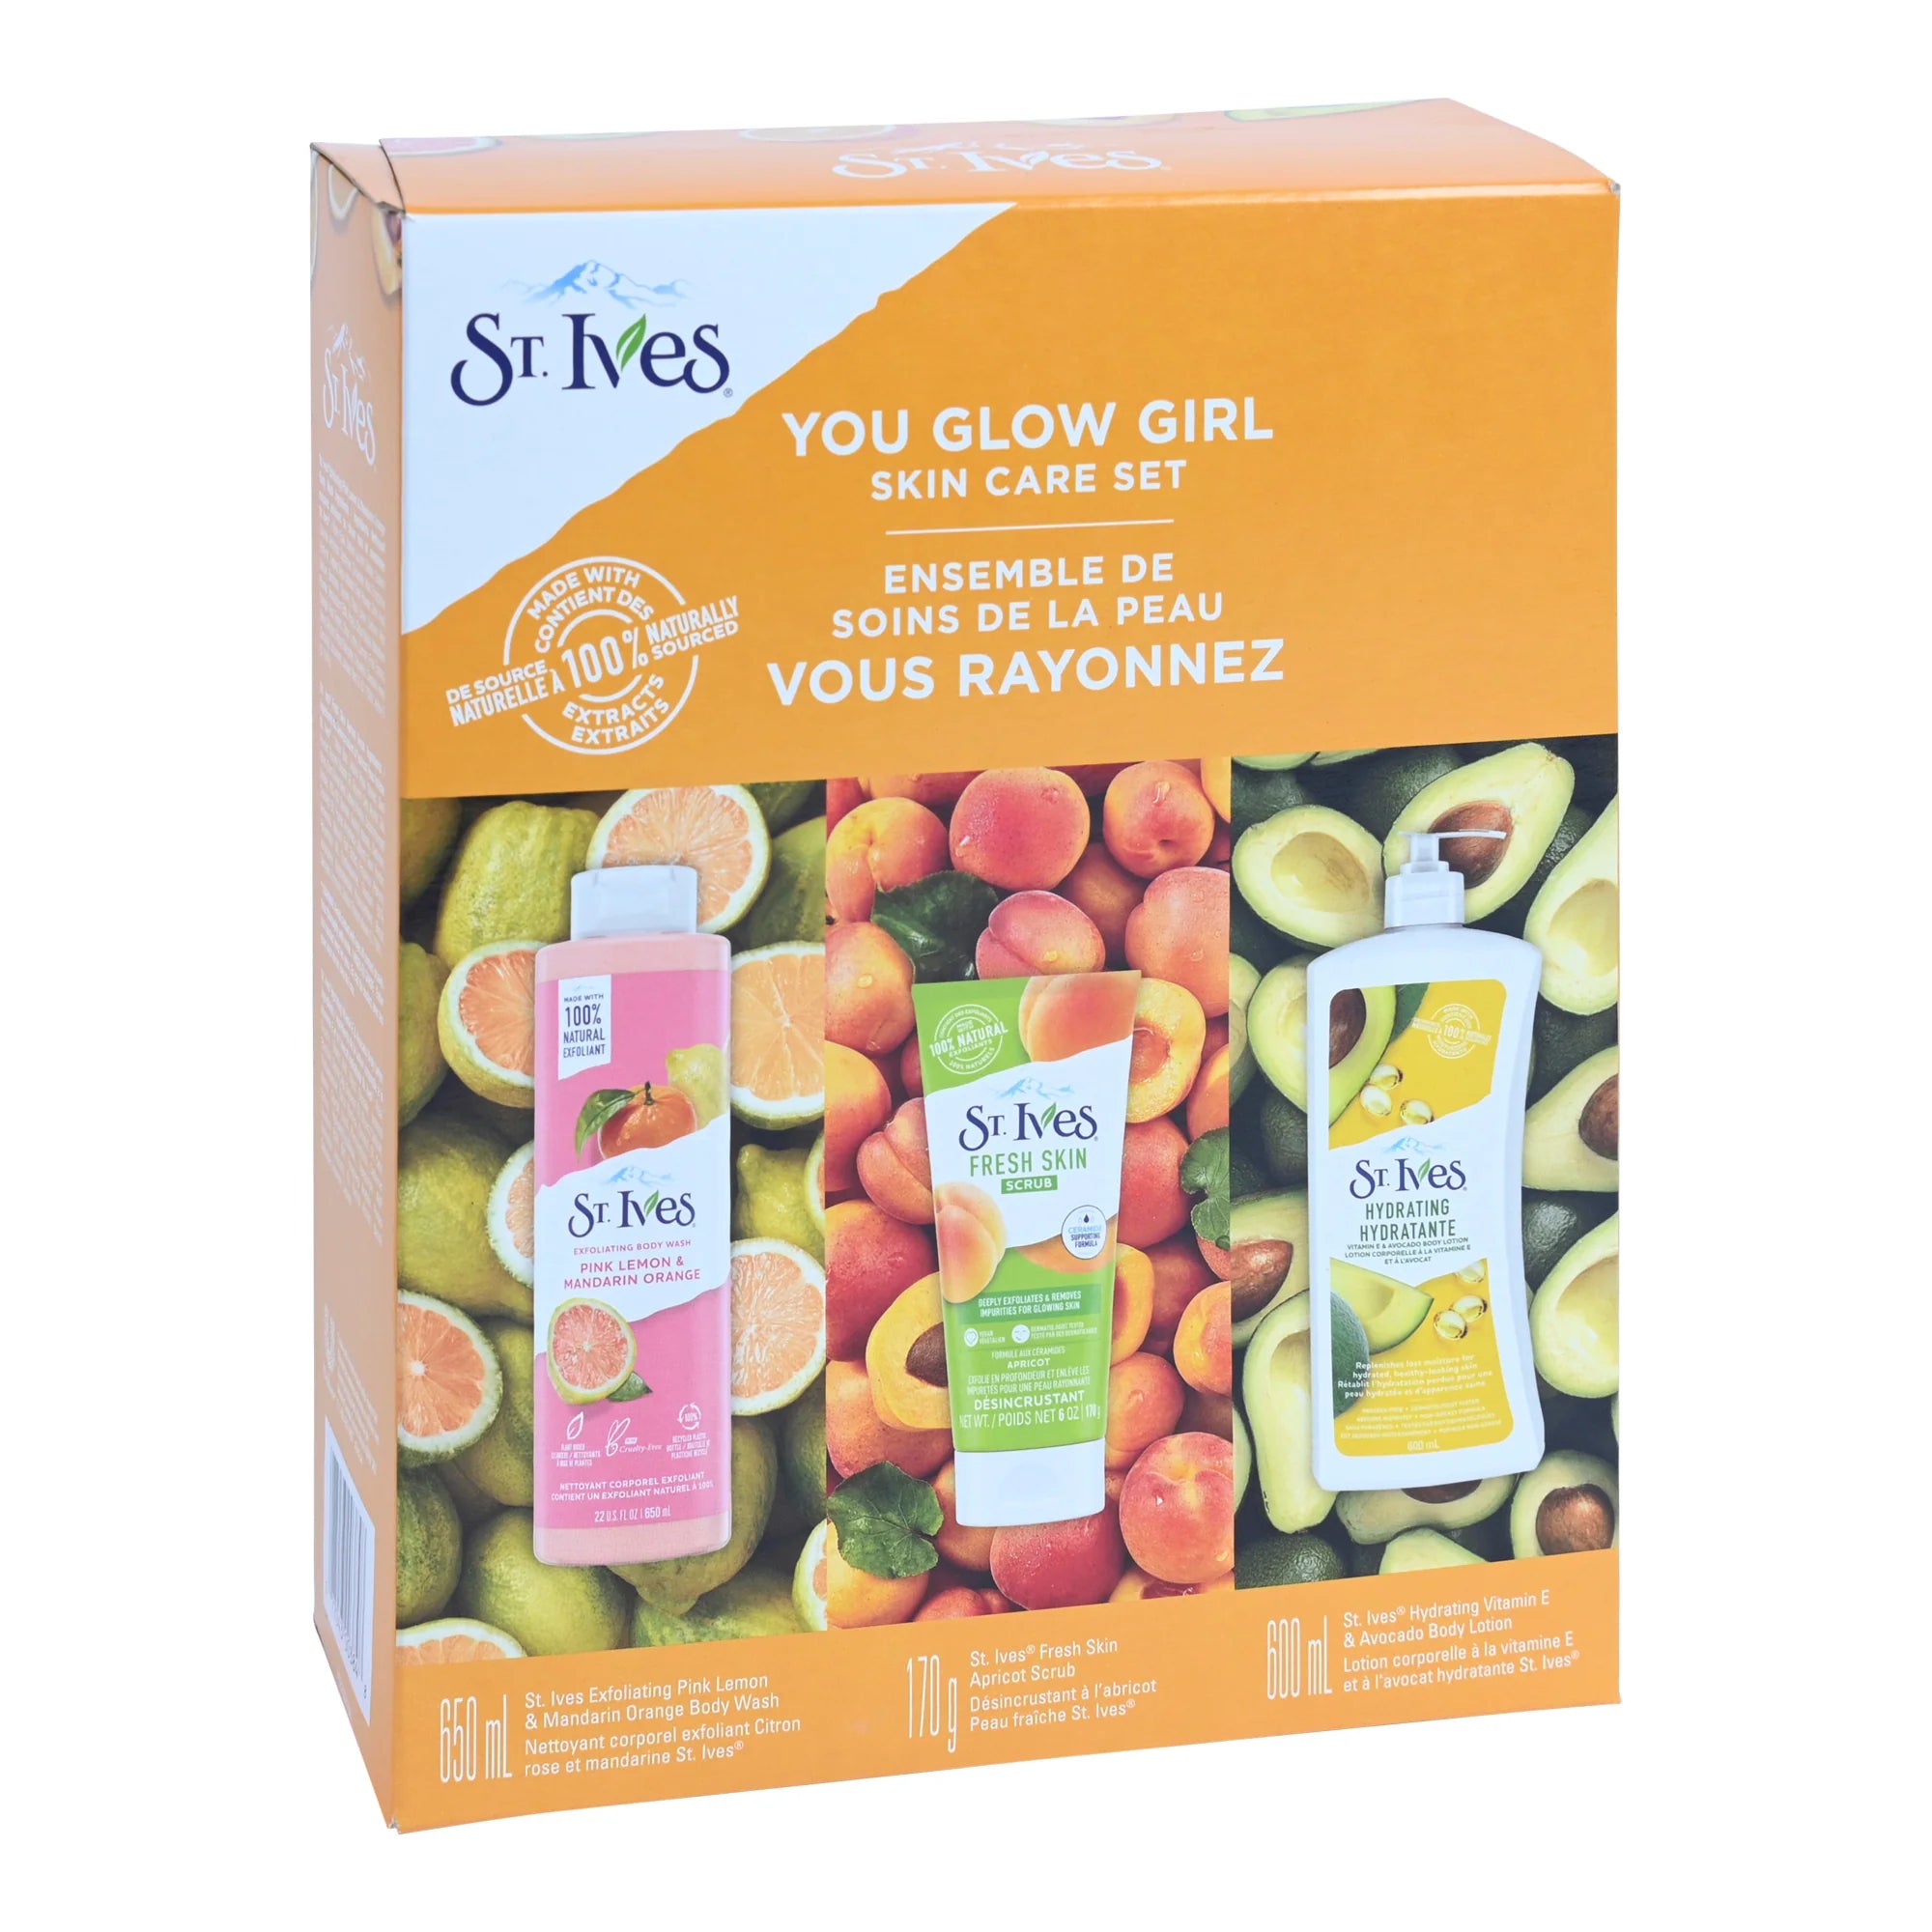 St. Ives You Glow Girl Skincare 3pc Set